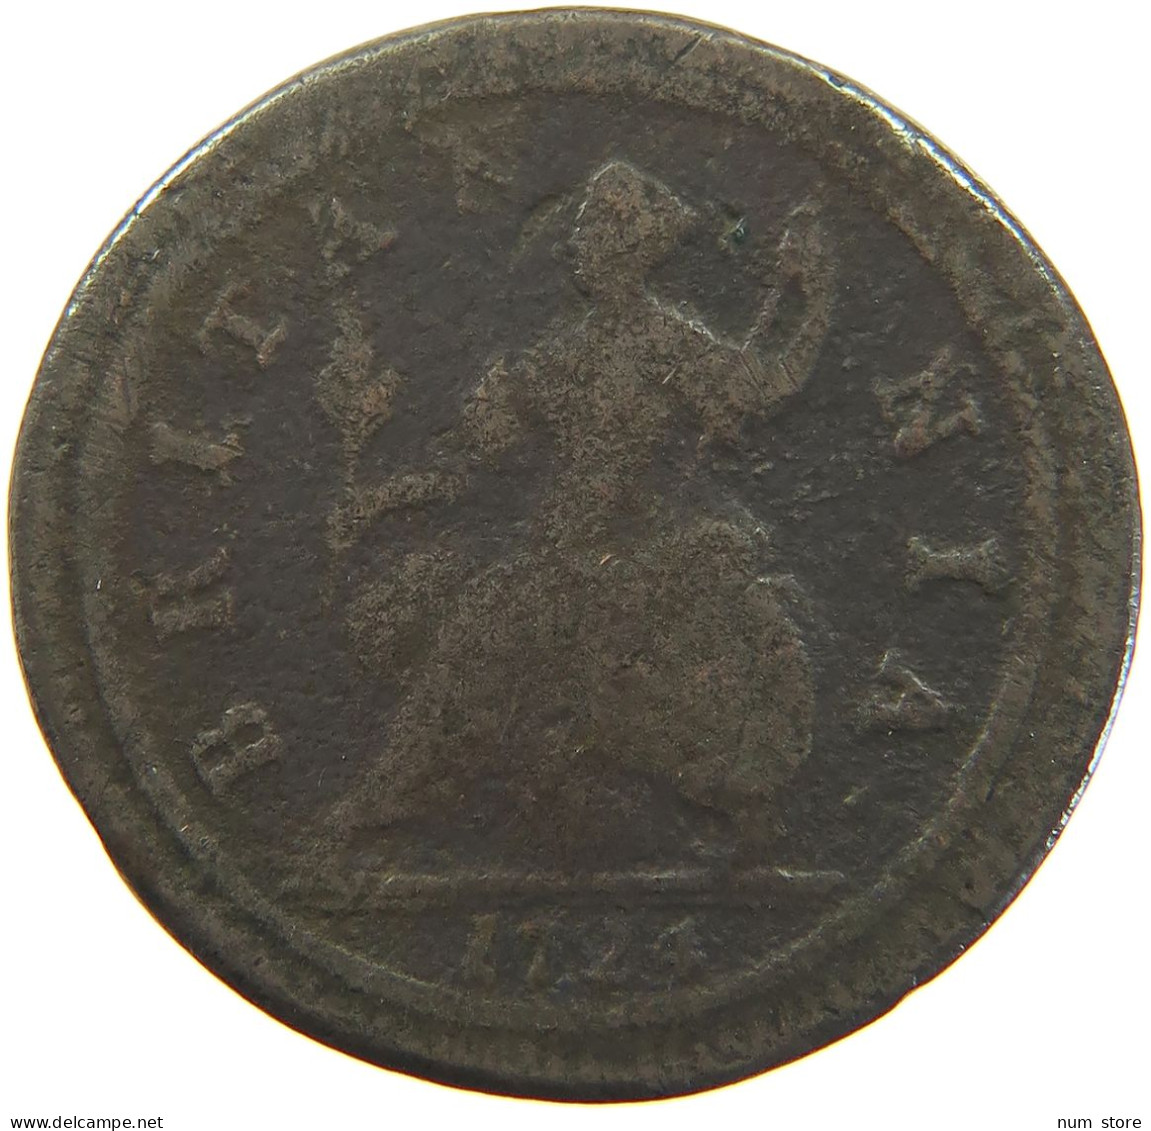 GREAT BRITAIN HALFPENNY 1724 George I. (1714-1727) #t155 0201 - B. 1/2 Penny